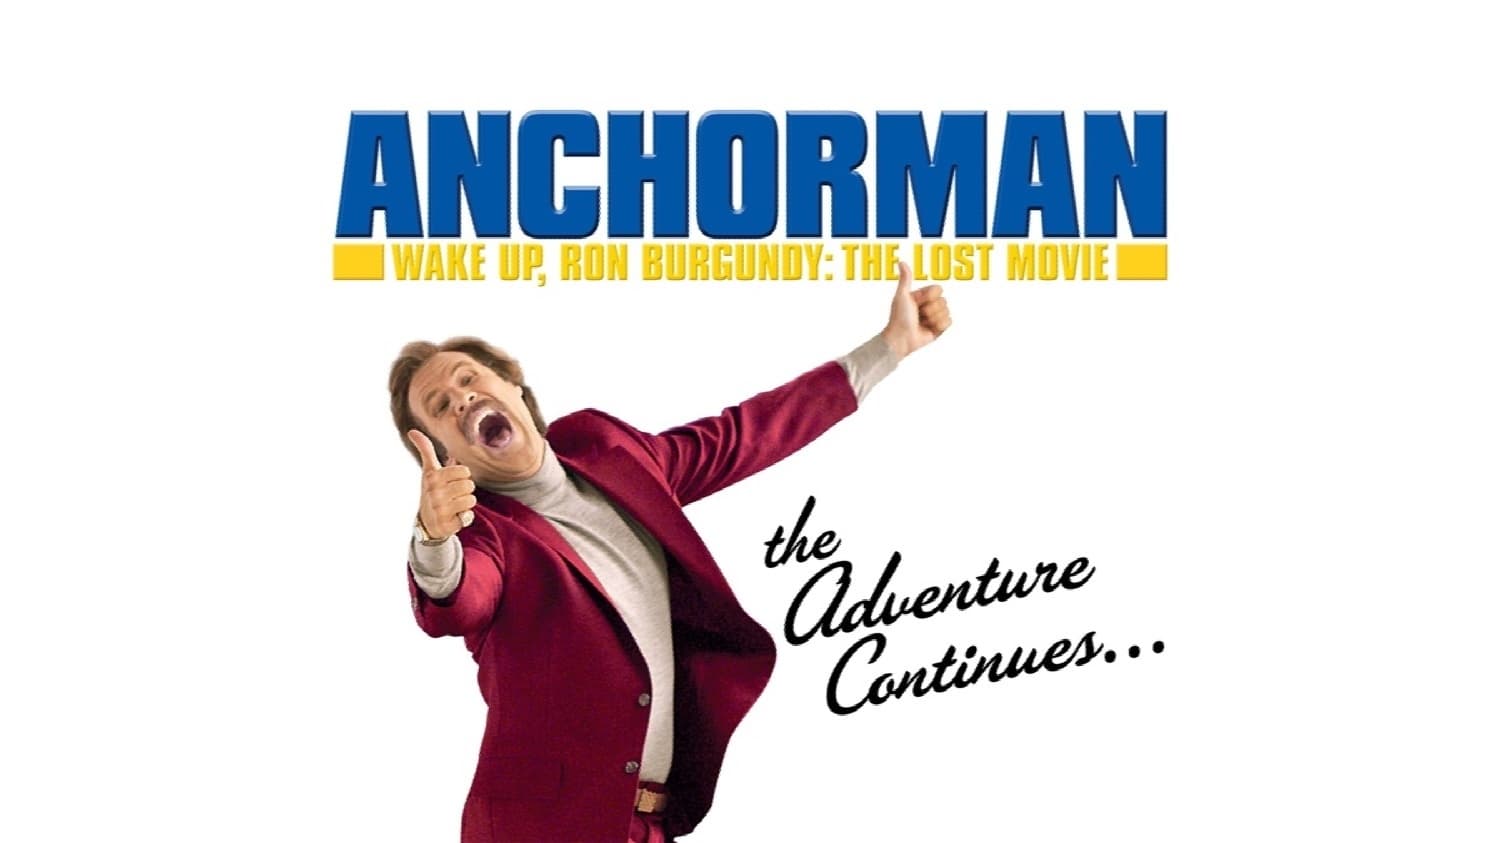 Wake Up, Ron Burgundy: The Lost Movie (2004)